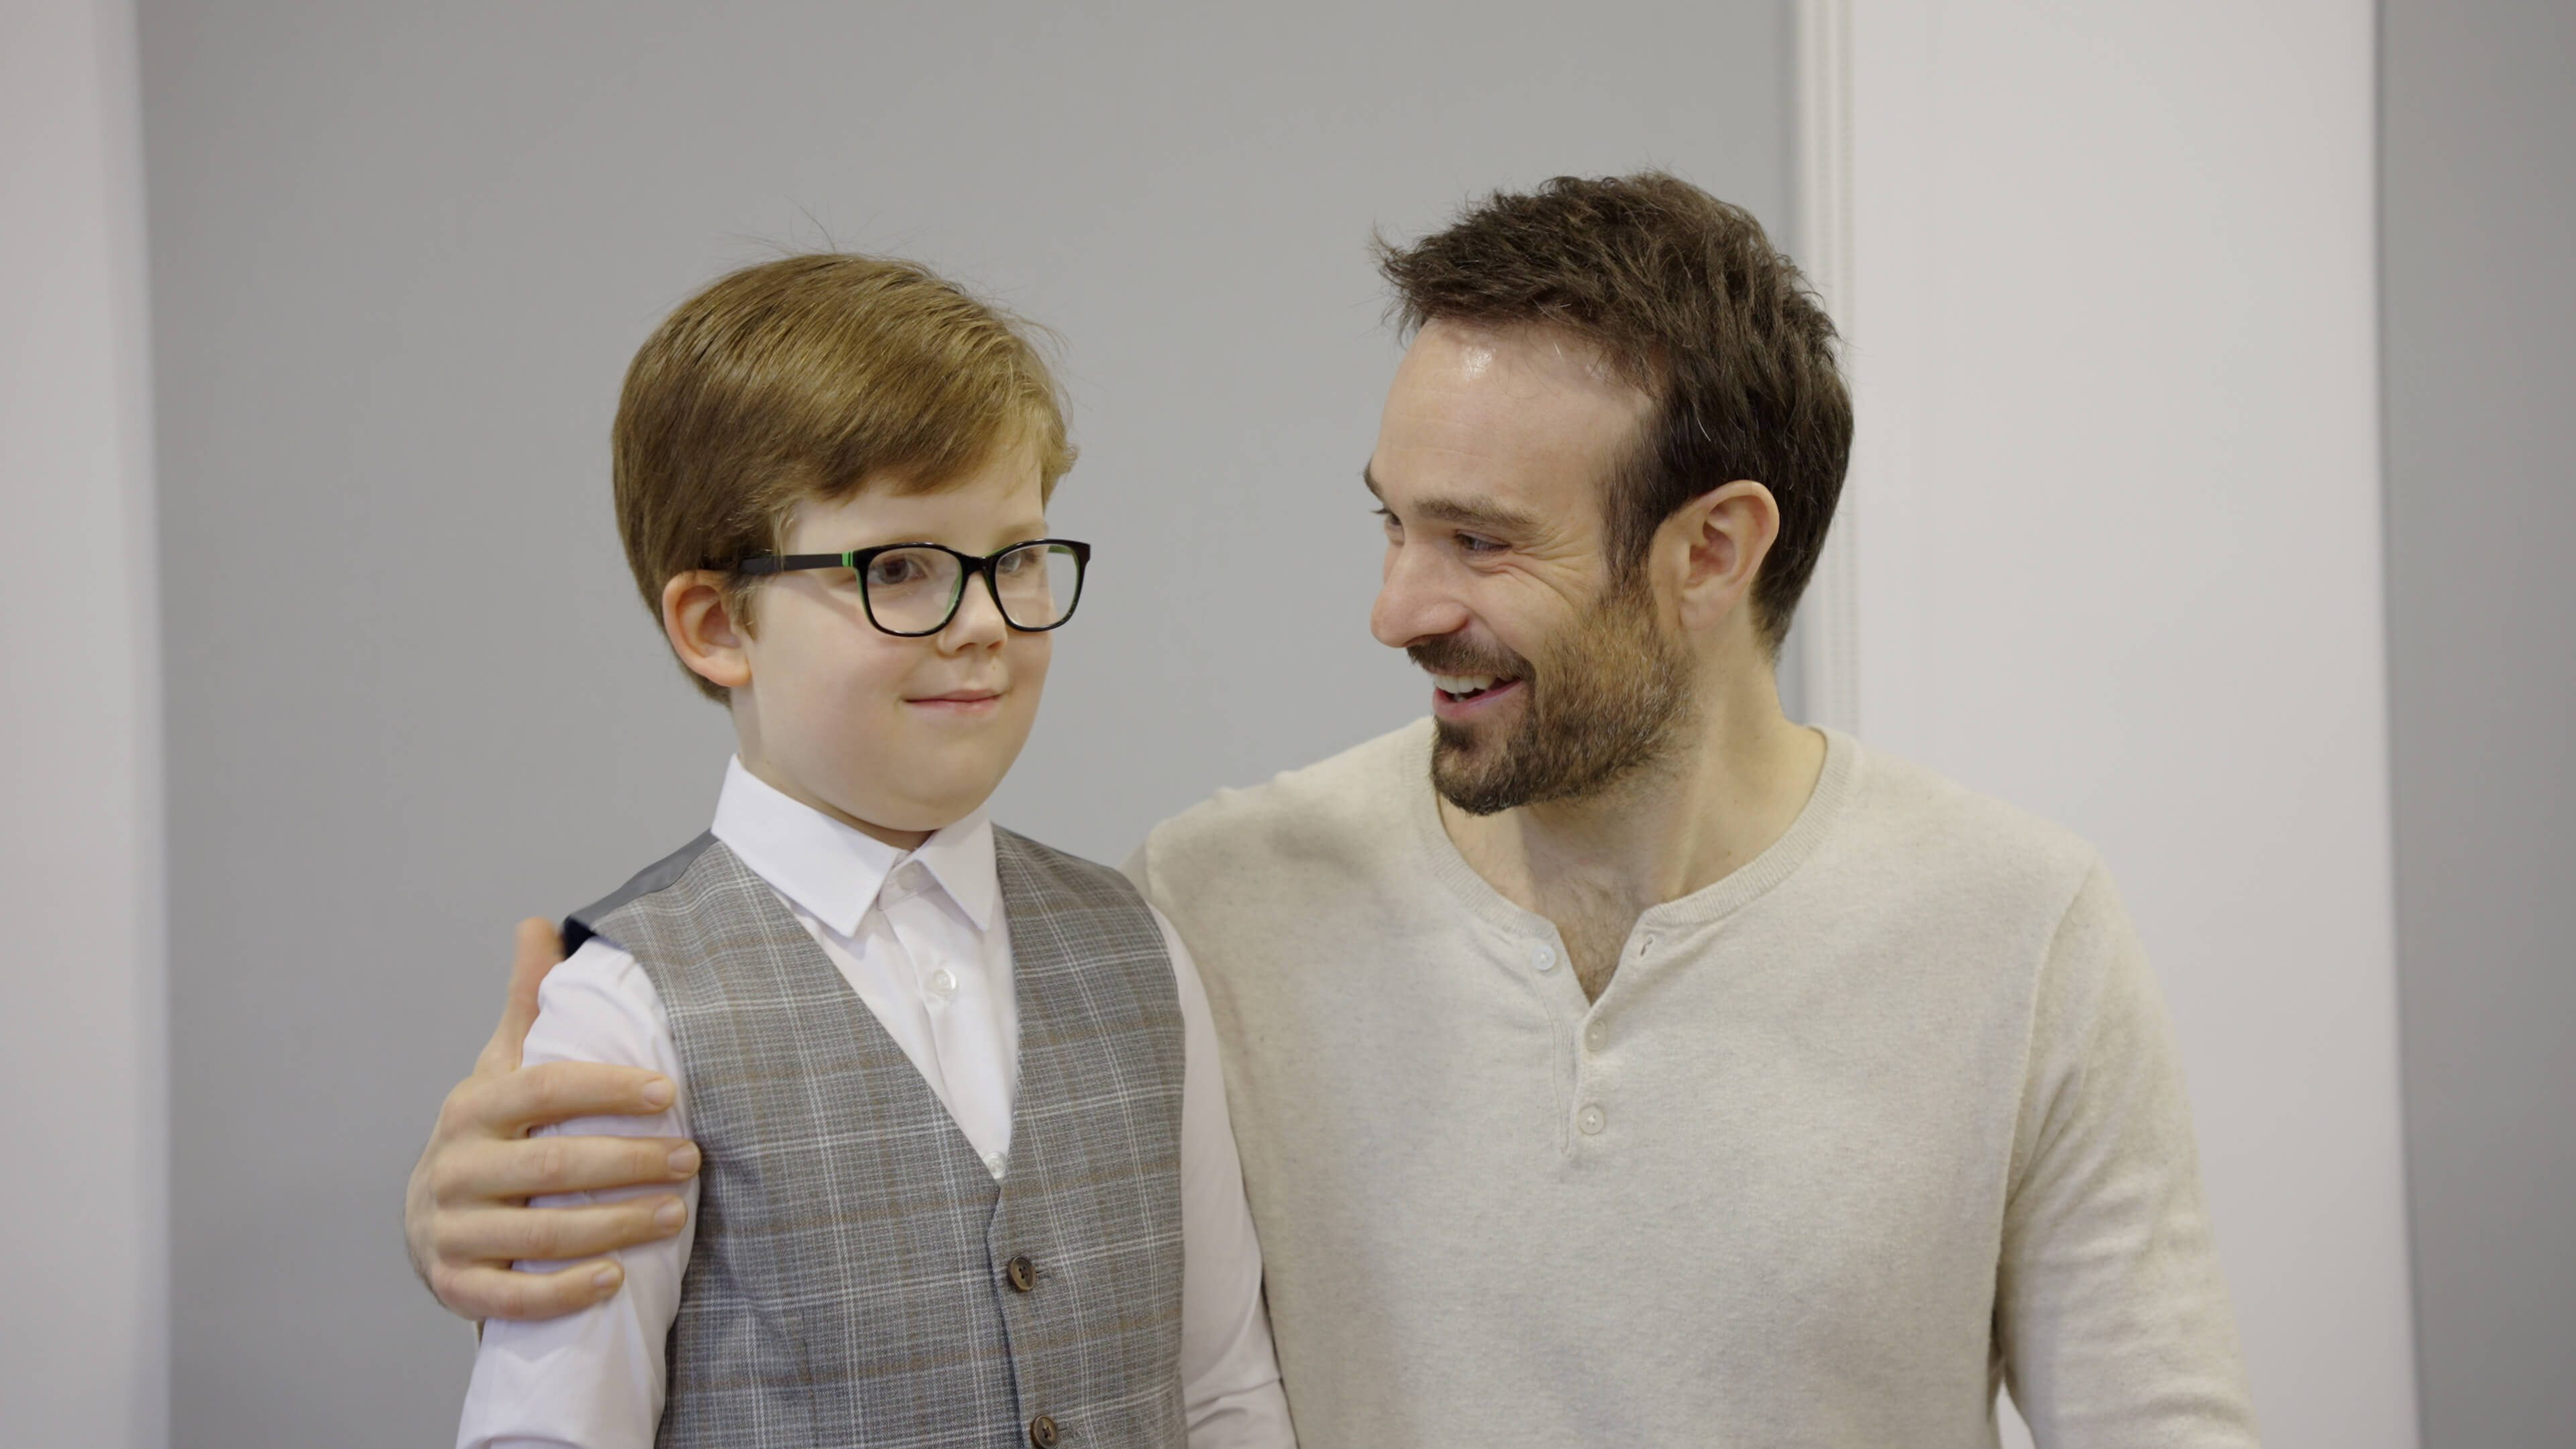 Six-year-old Rex, wearing glasses, a white shirt and grey waistcoat, stands next to Charlie Cox, who is kneeling next to him with his arm around him. Charlie looks at Rex and smiles.